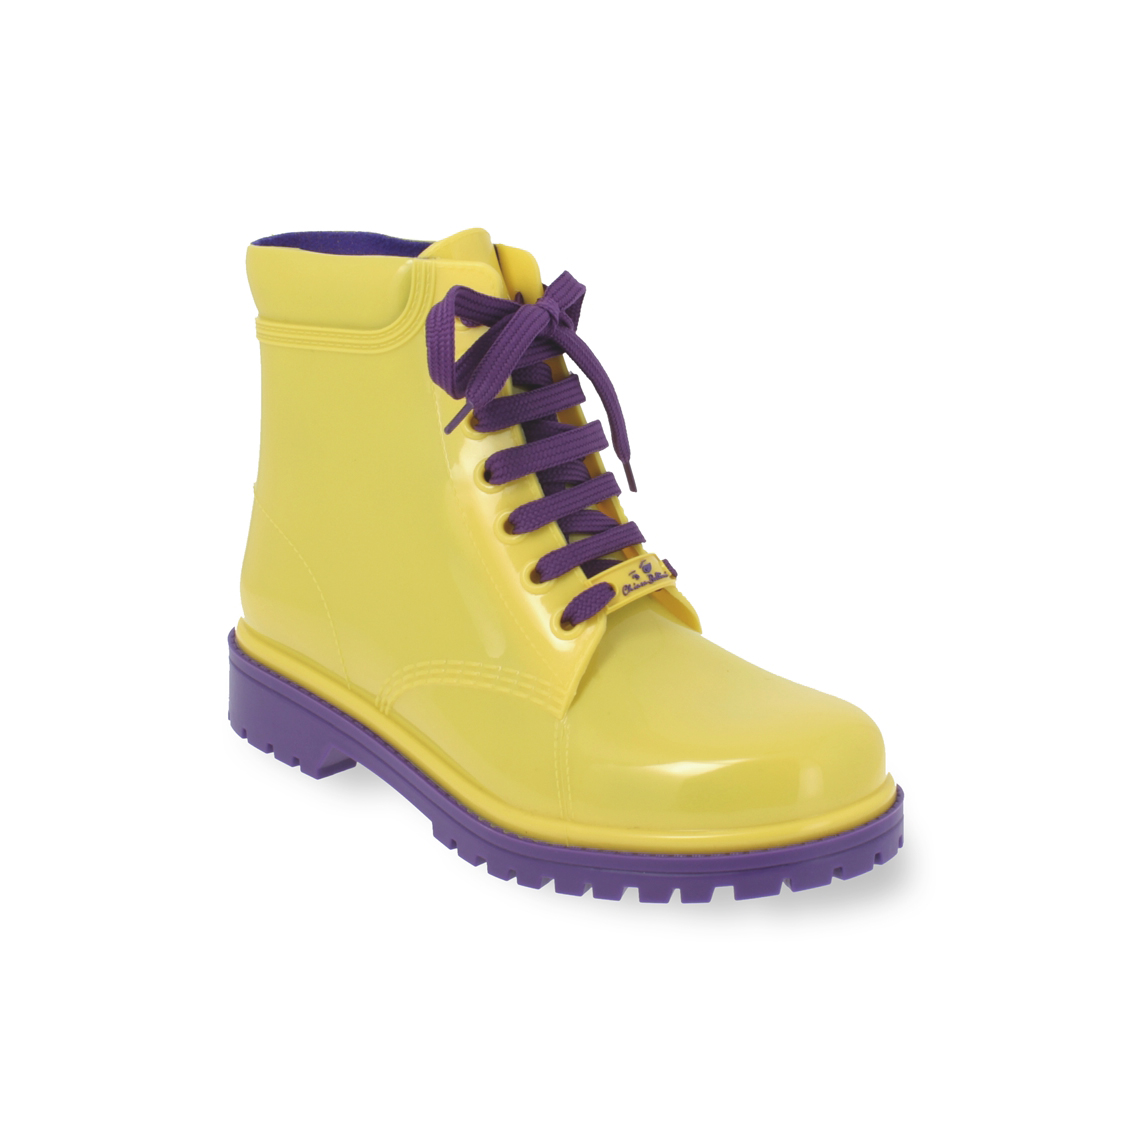 Short laced up boot in dual colour PVC.